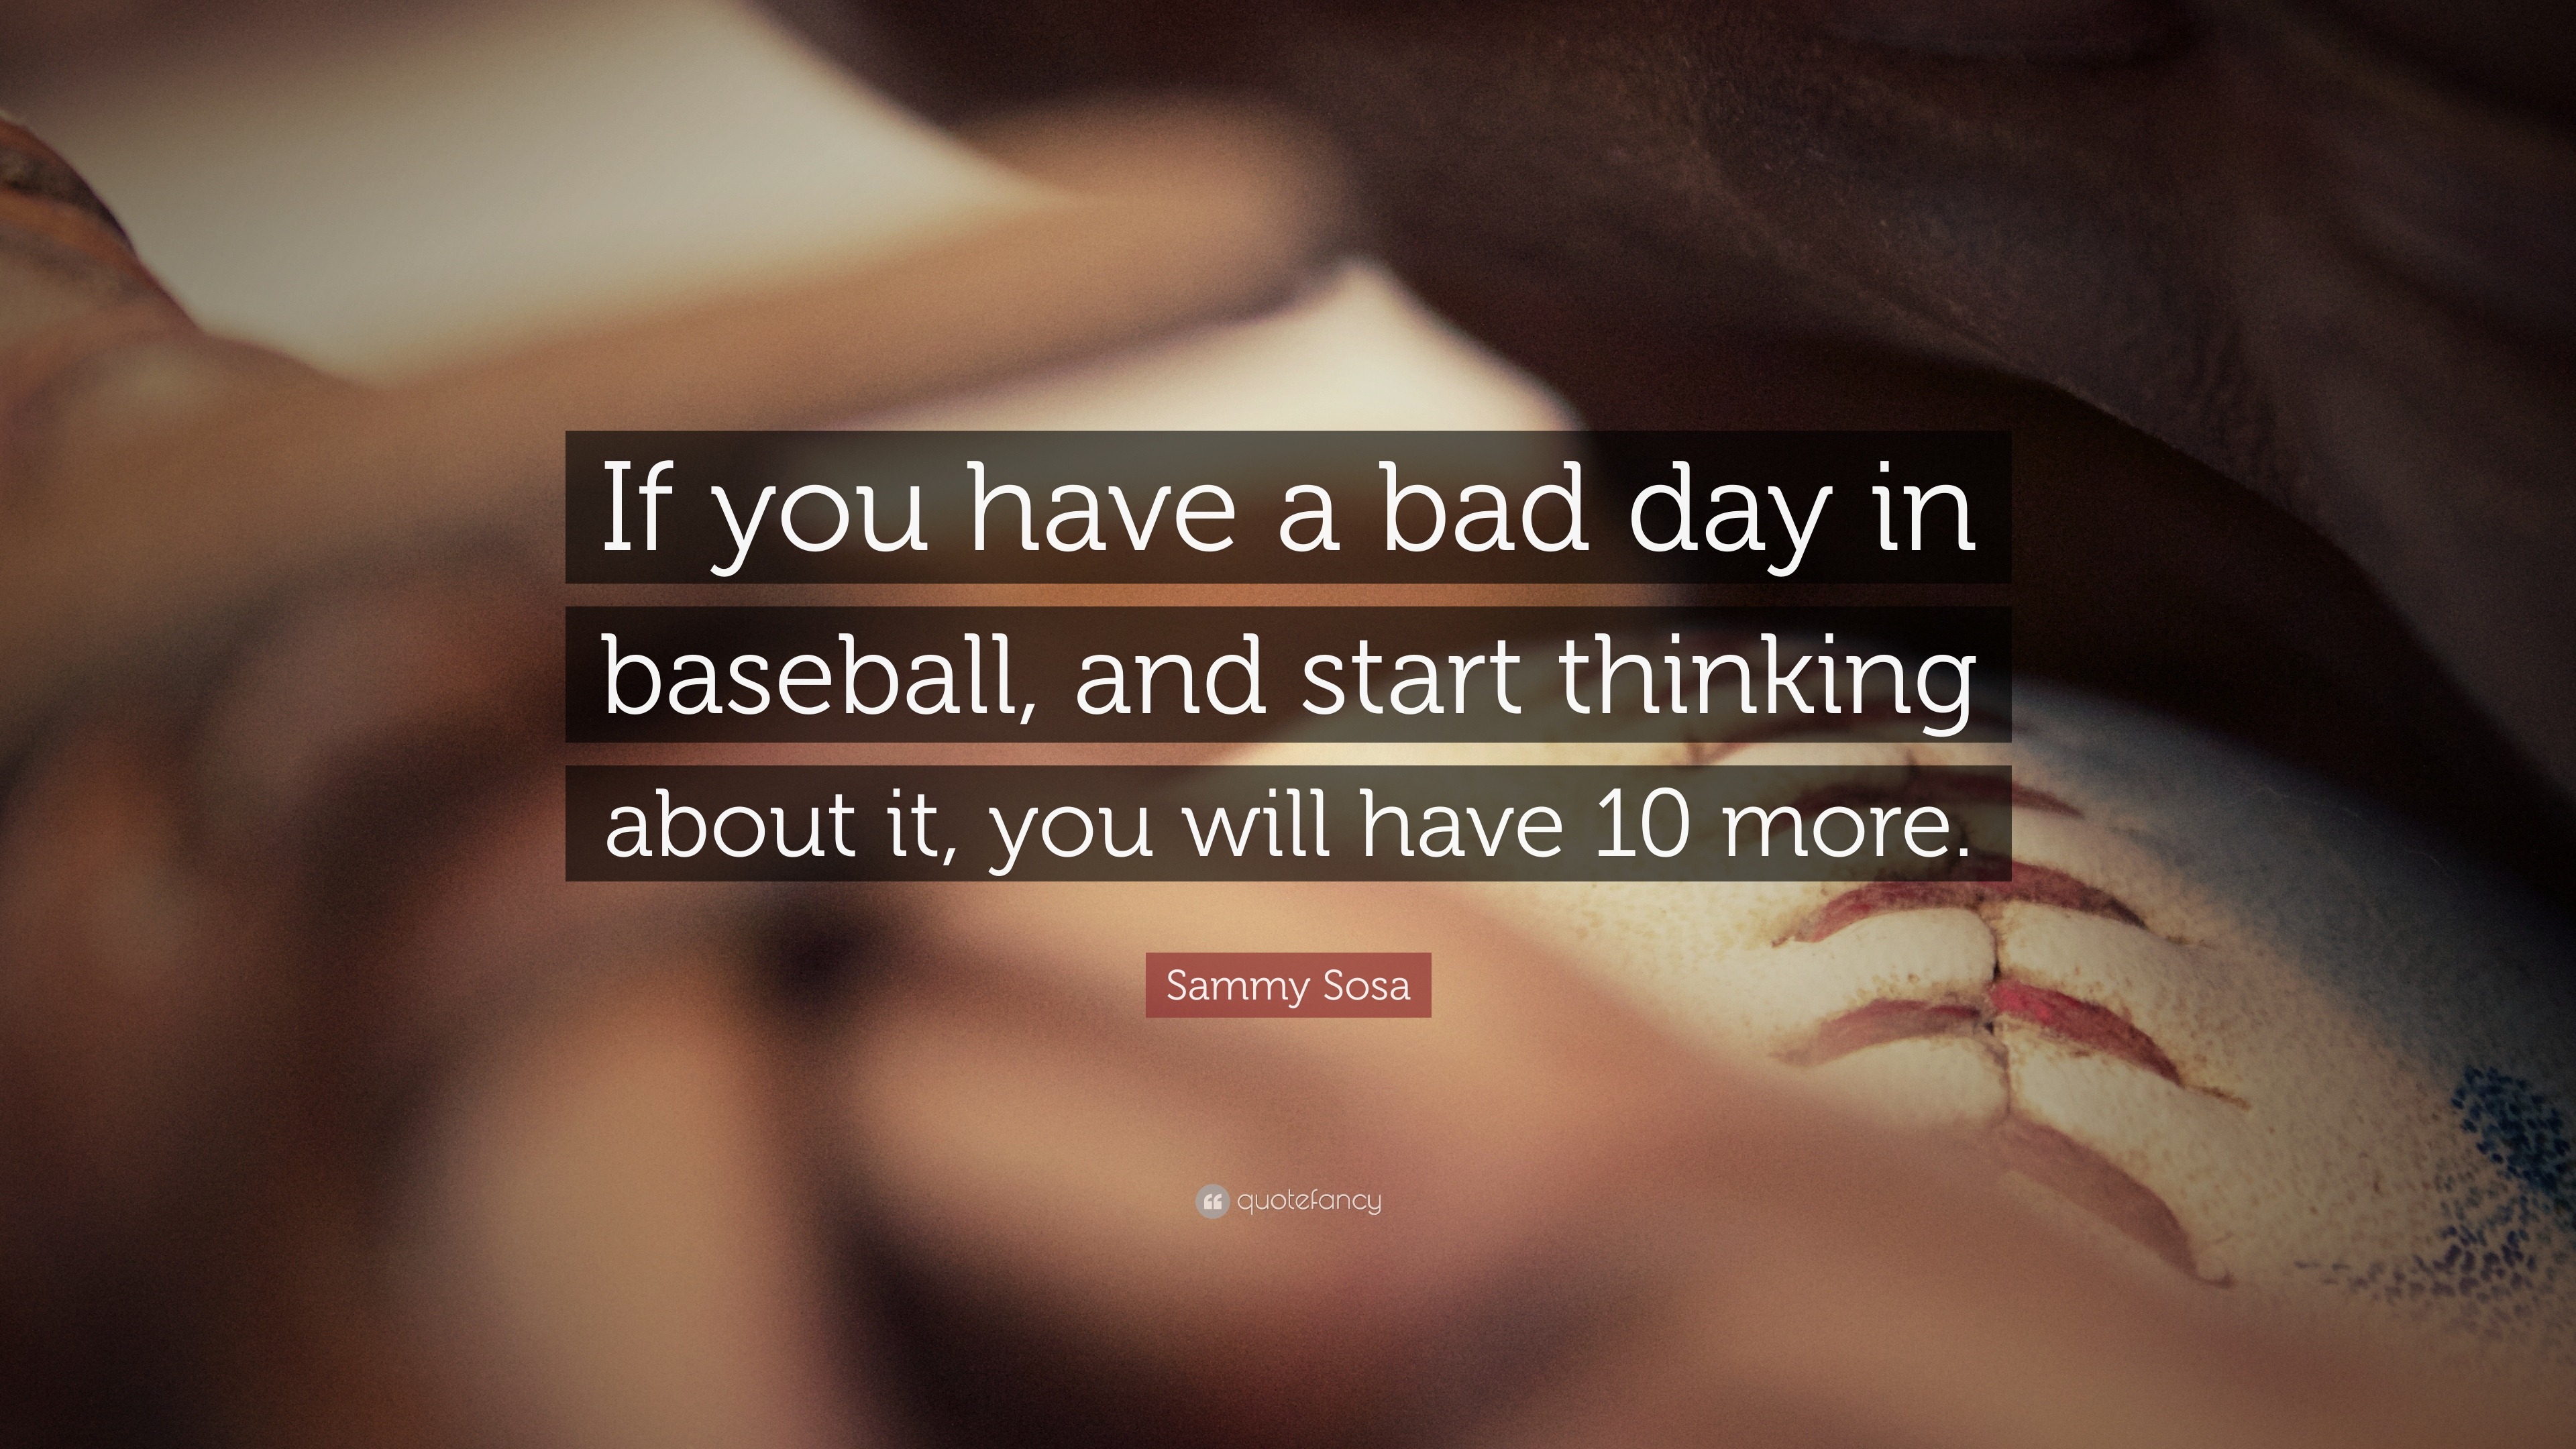 Sammy Sosa Quote: “If you have a bad day in baseball, and start thinking  about it,